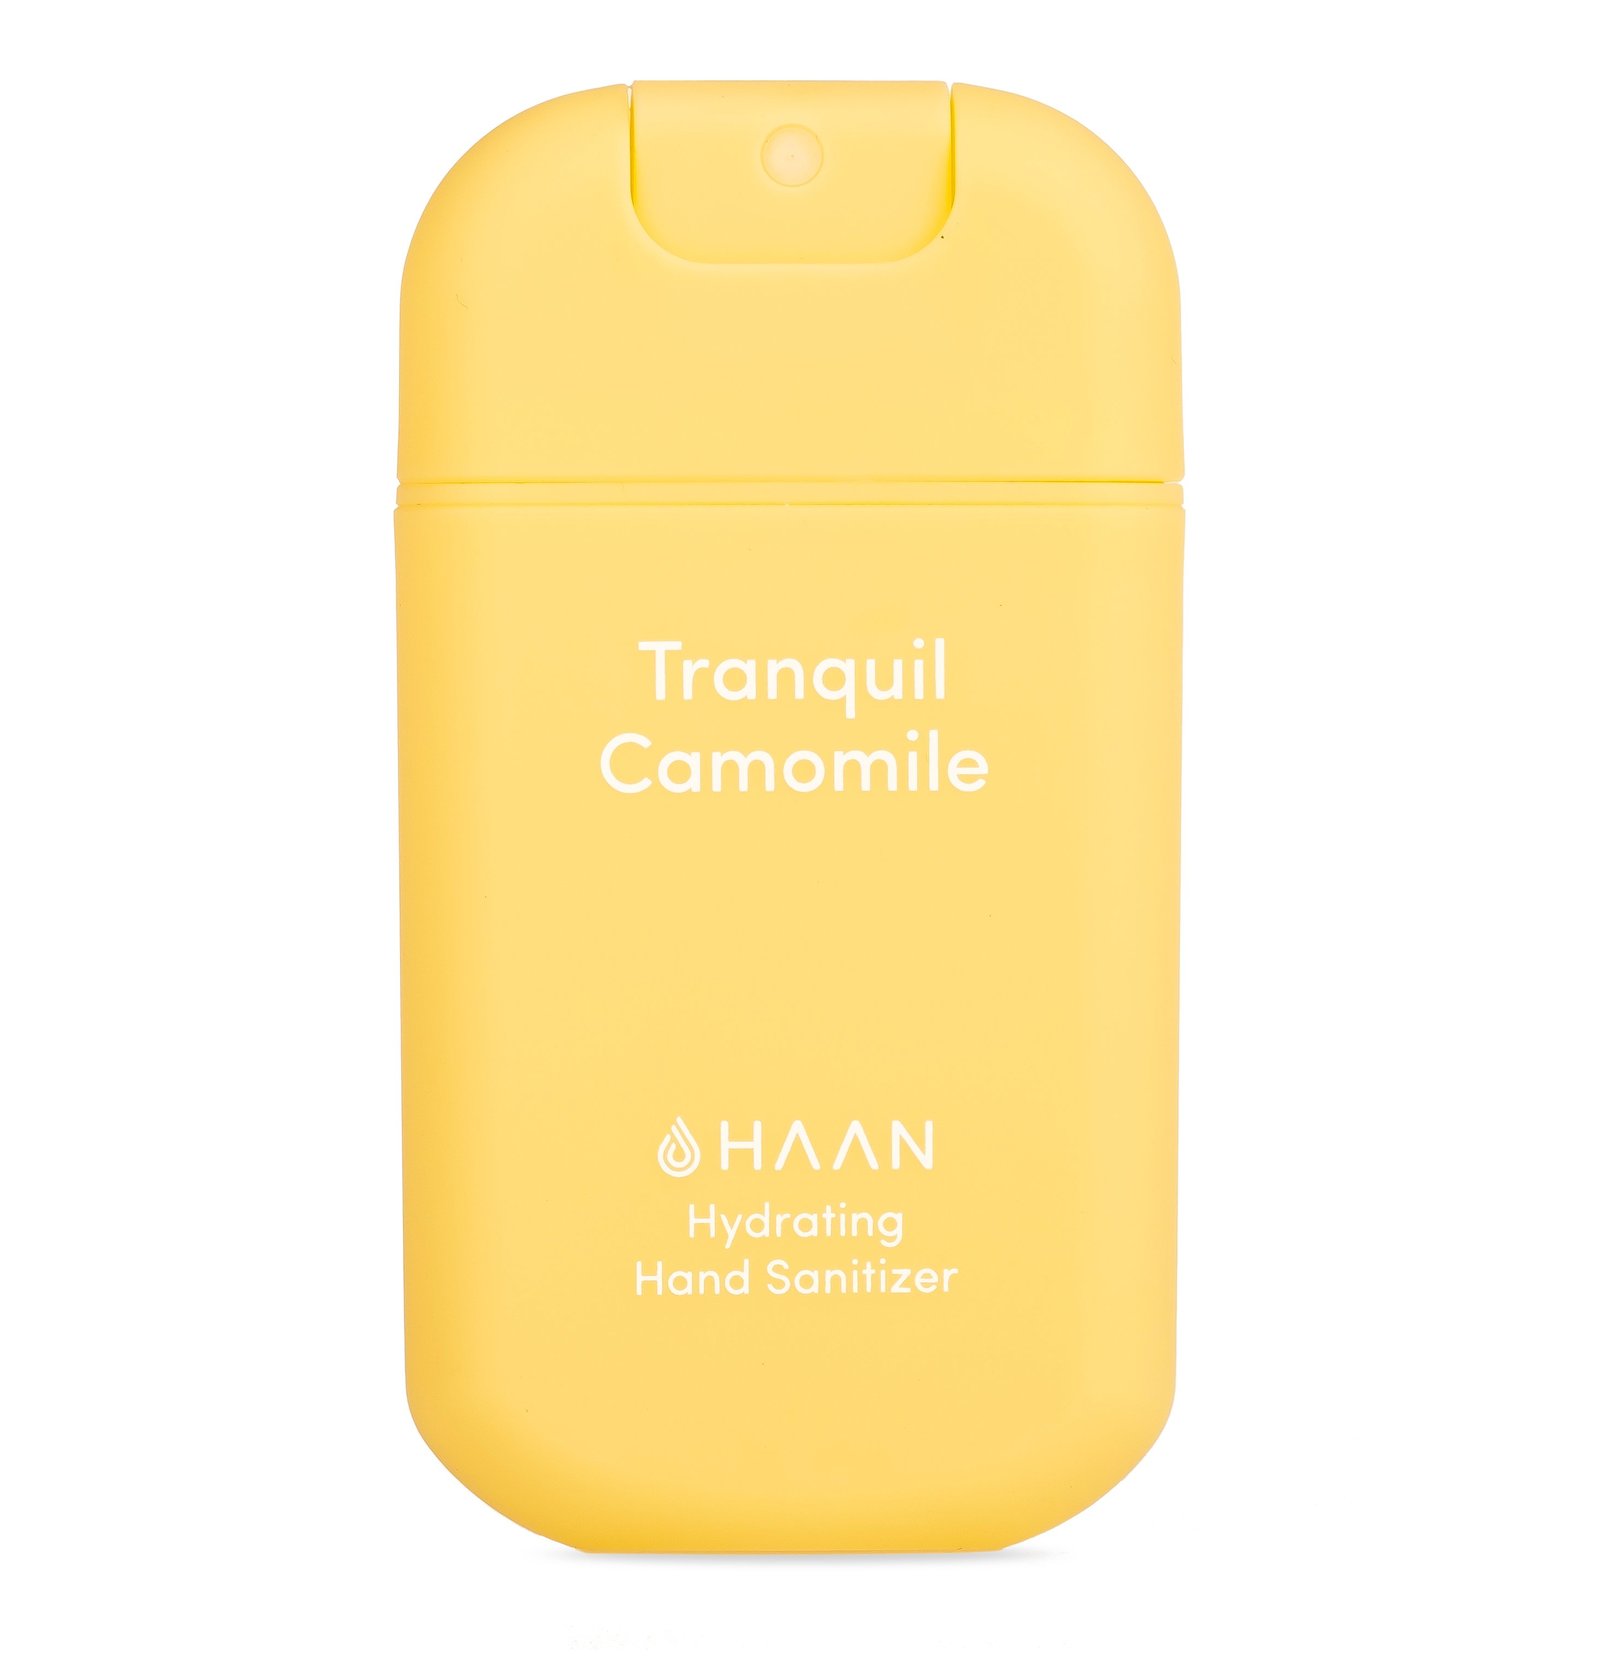 HAAN Tranquil Camomile Hydrating Pocket Hand Sanitizer 30 ml